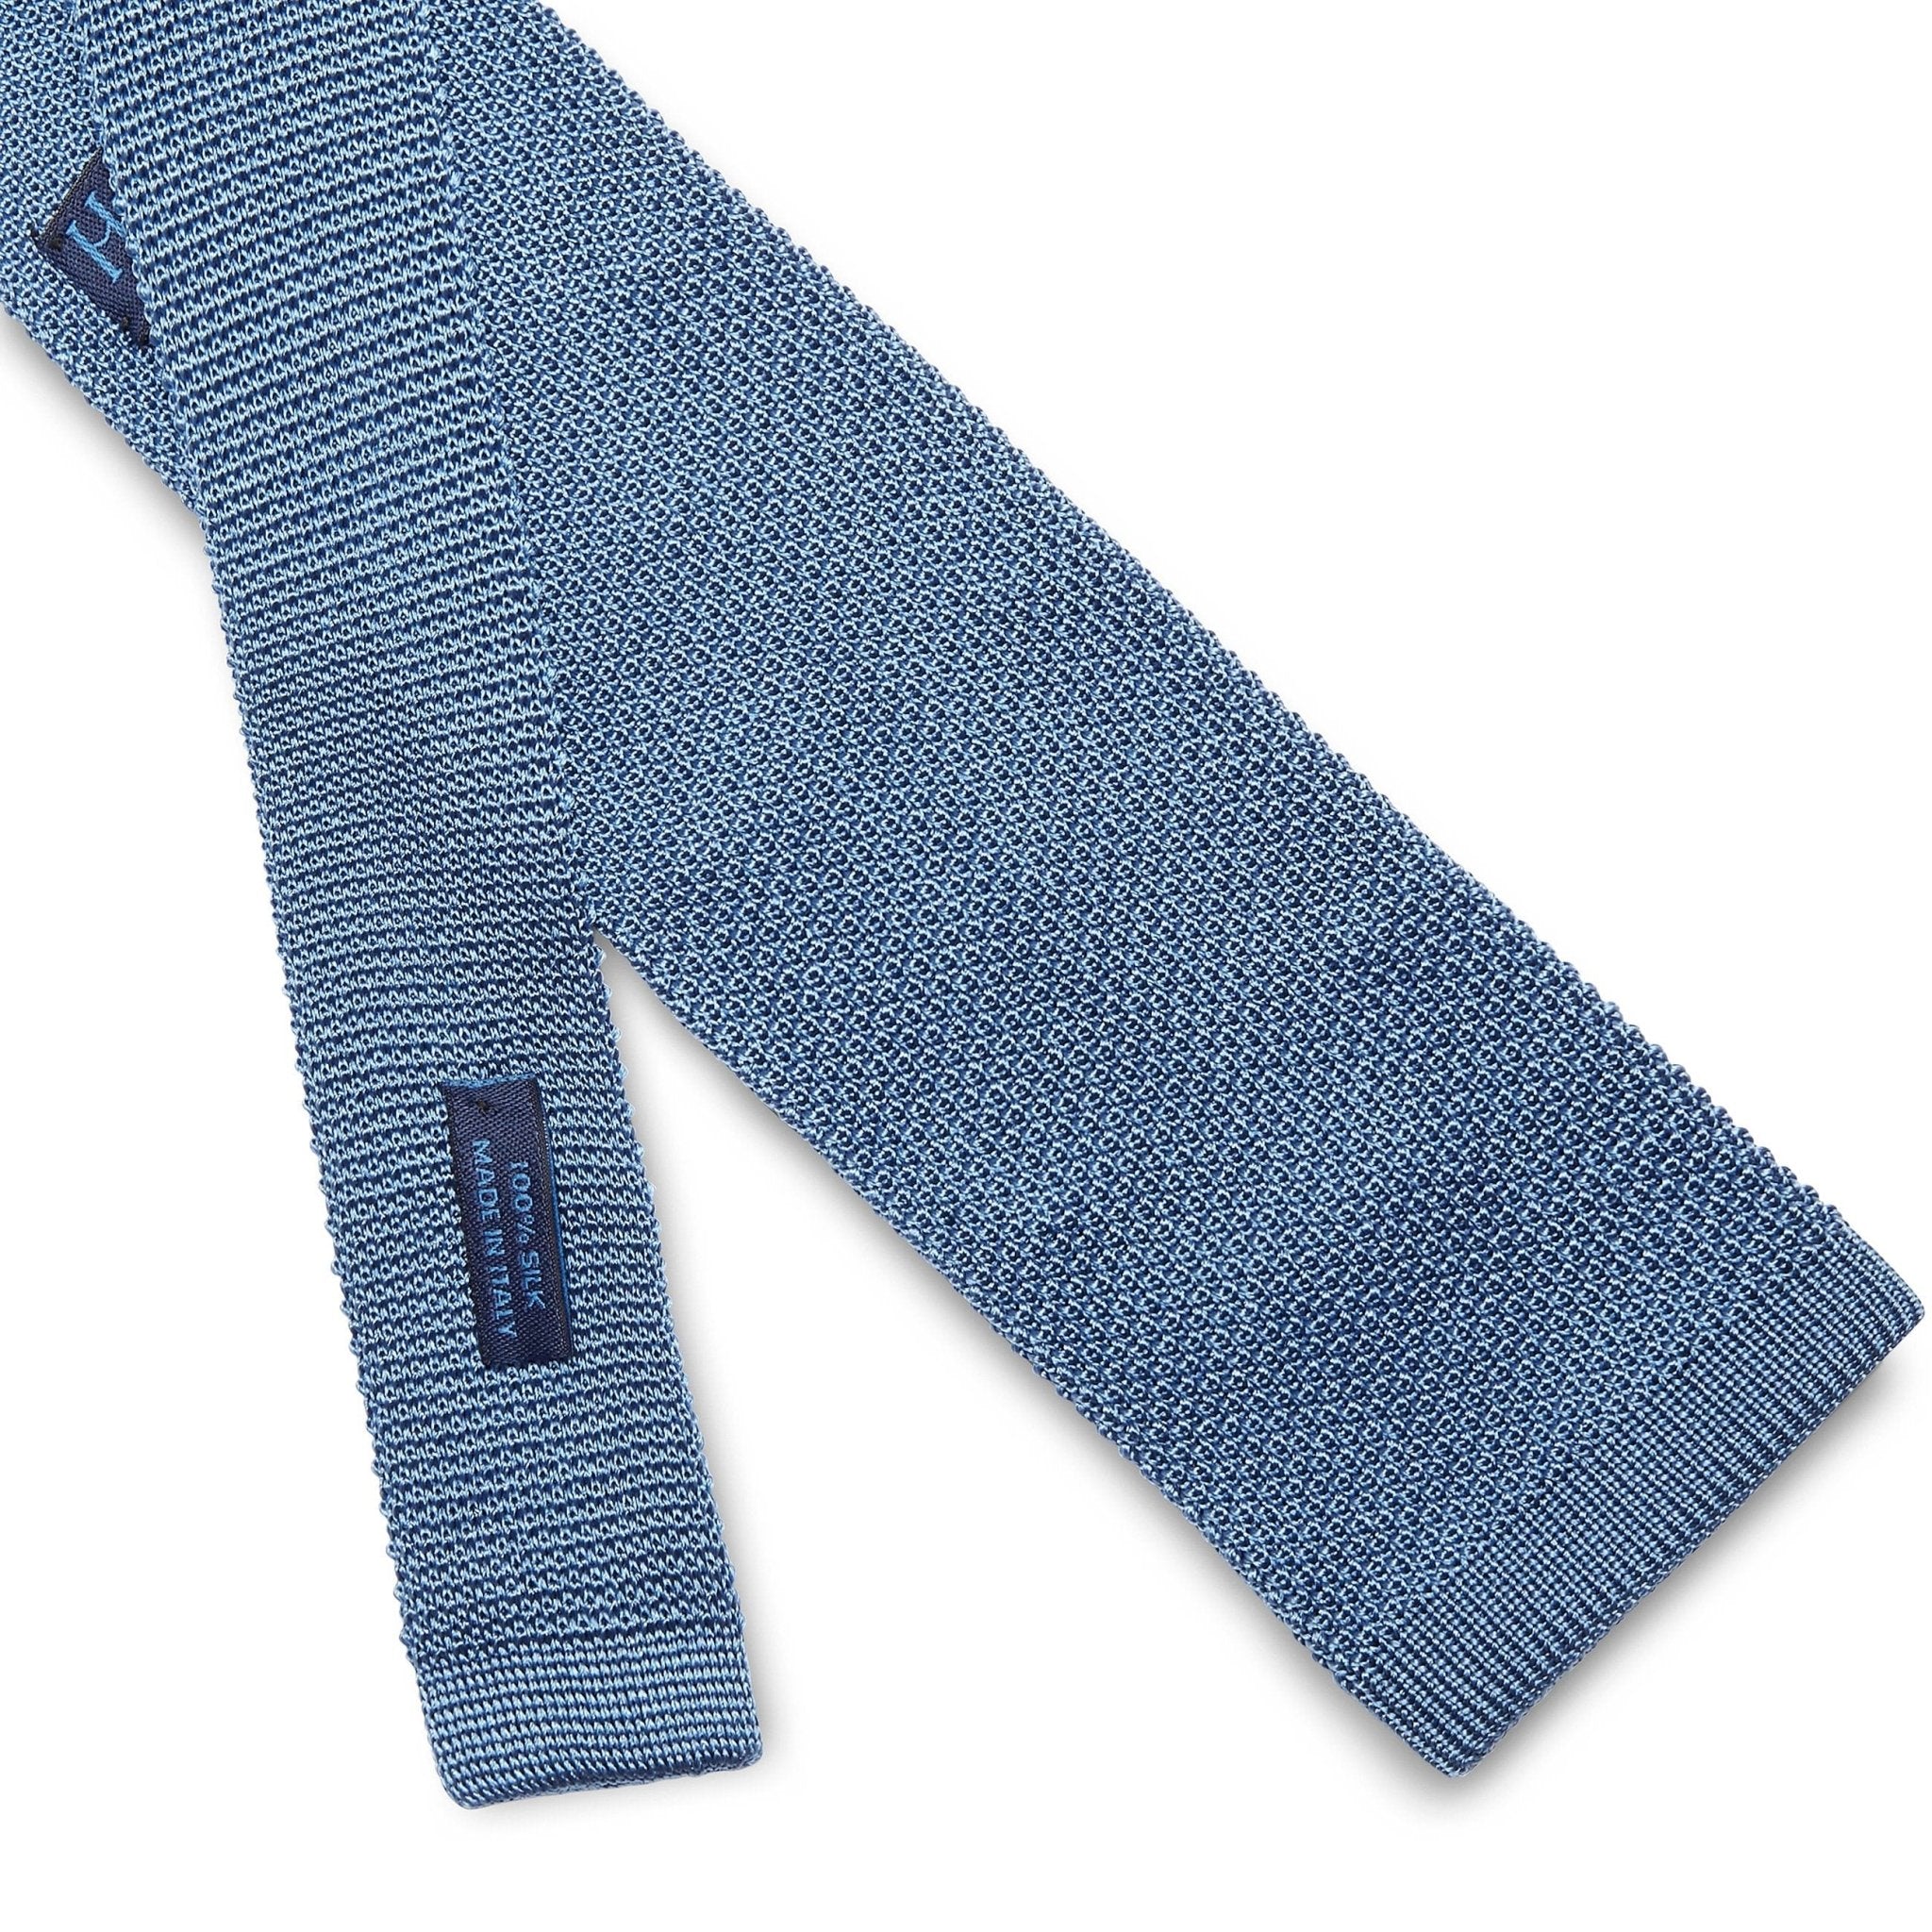 Light Blue Knitted Silk Tie with White Spots